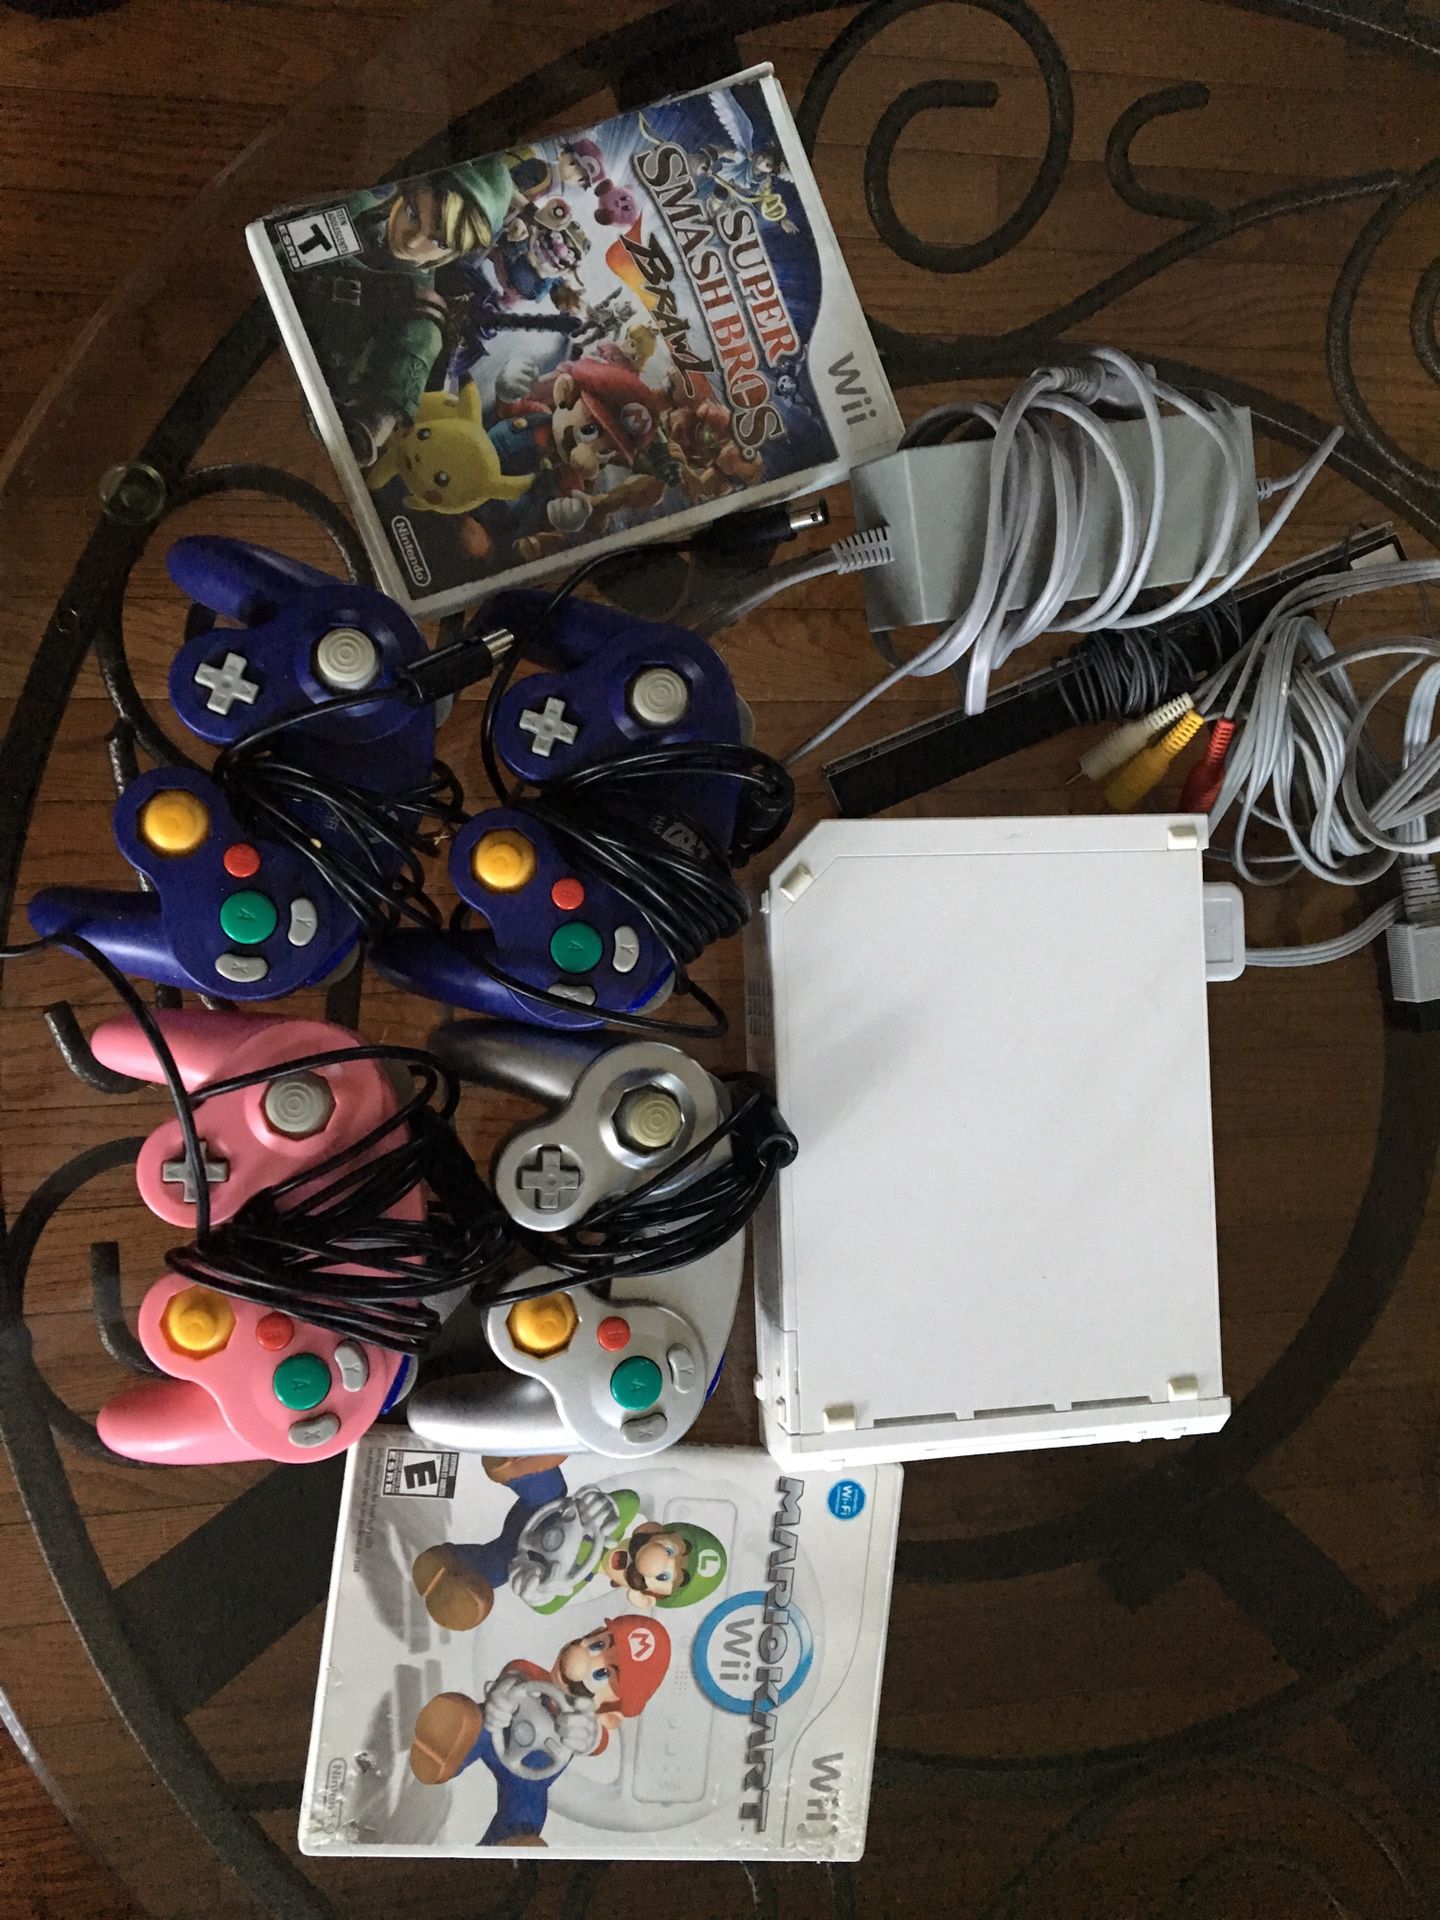 wii with games